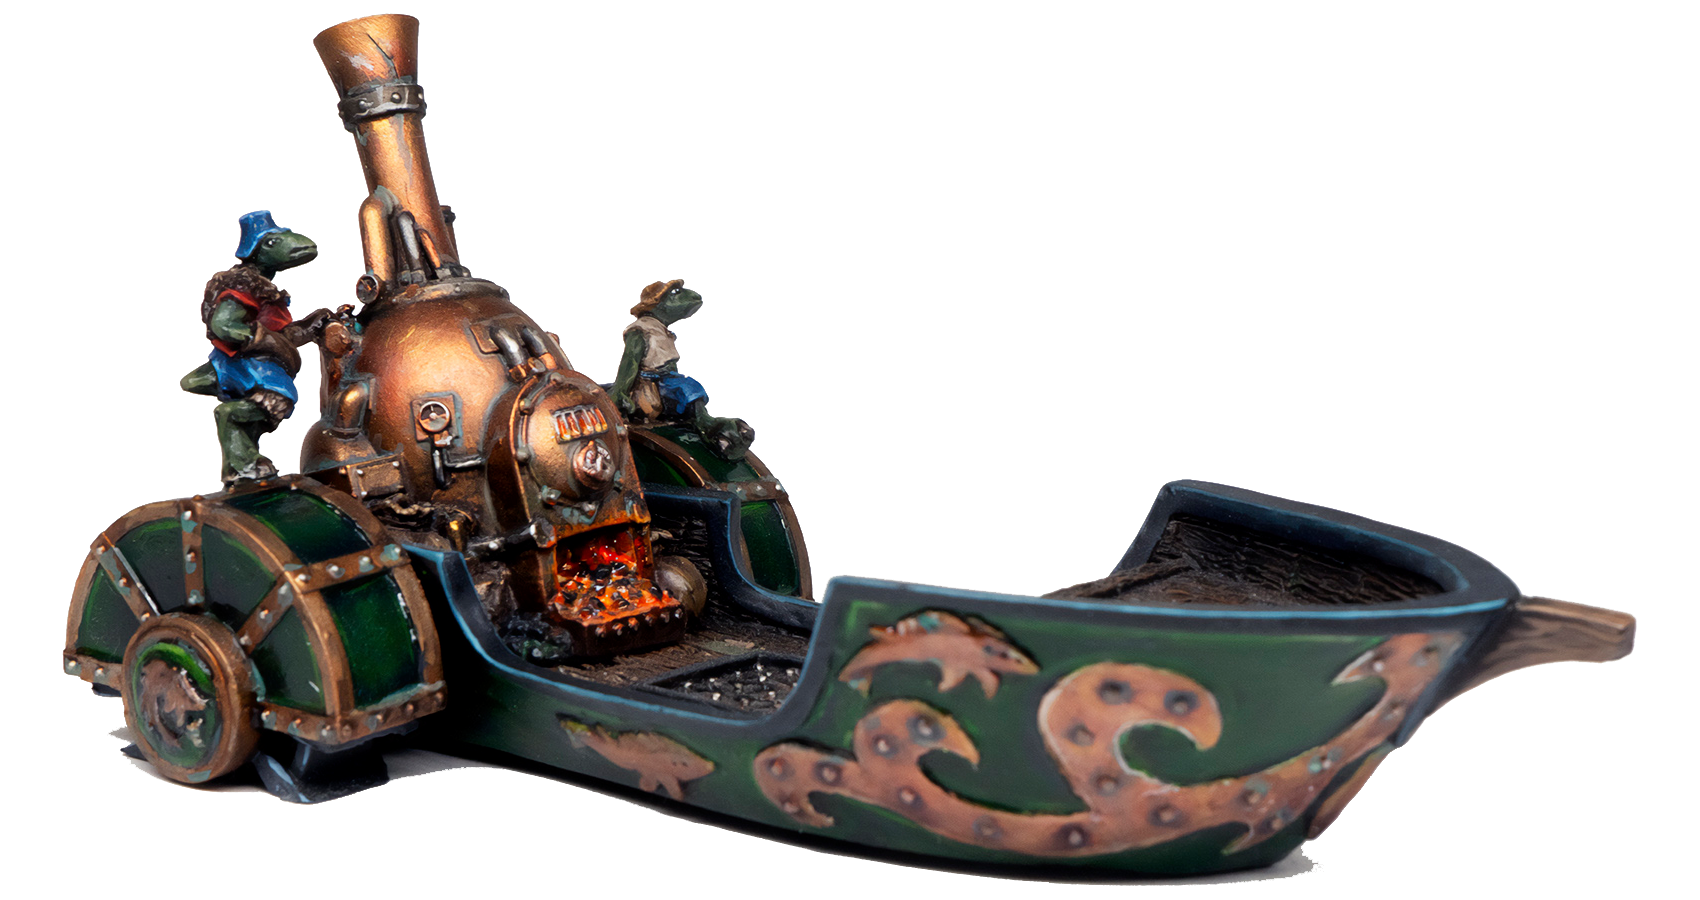 Riverfolk: The Kadrigan (Steam boat with fixed crew)